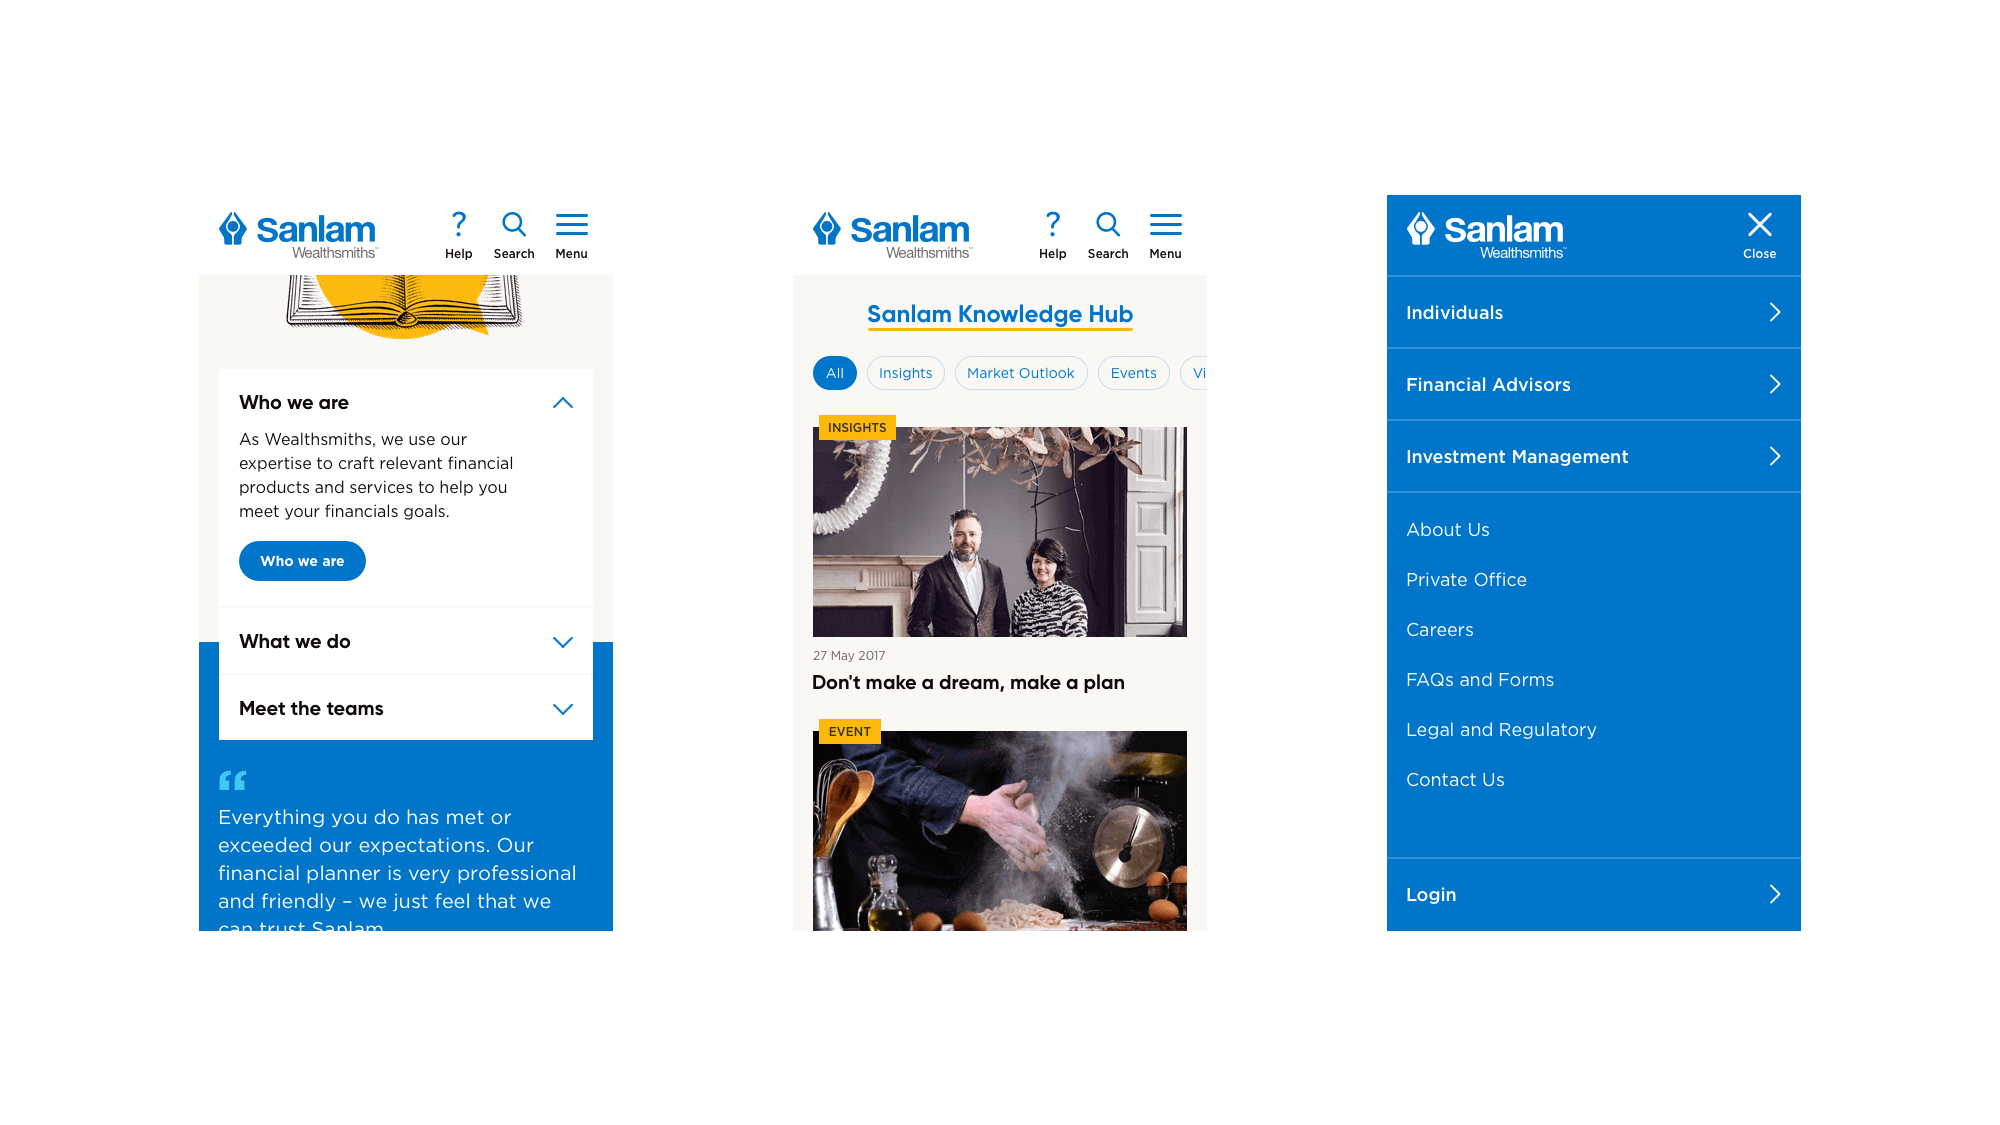 Mobile designs for Sanlam's ‘About Us’ section on the homepage, article listing page, and menu overlay